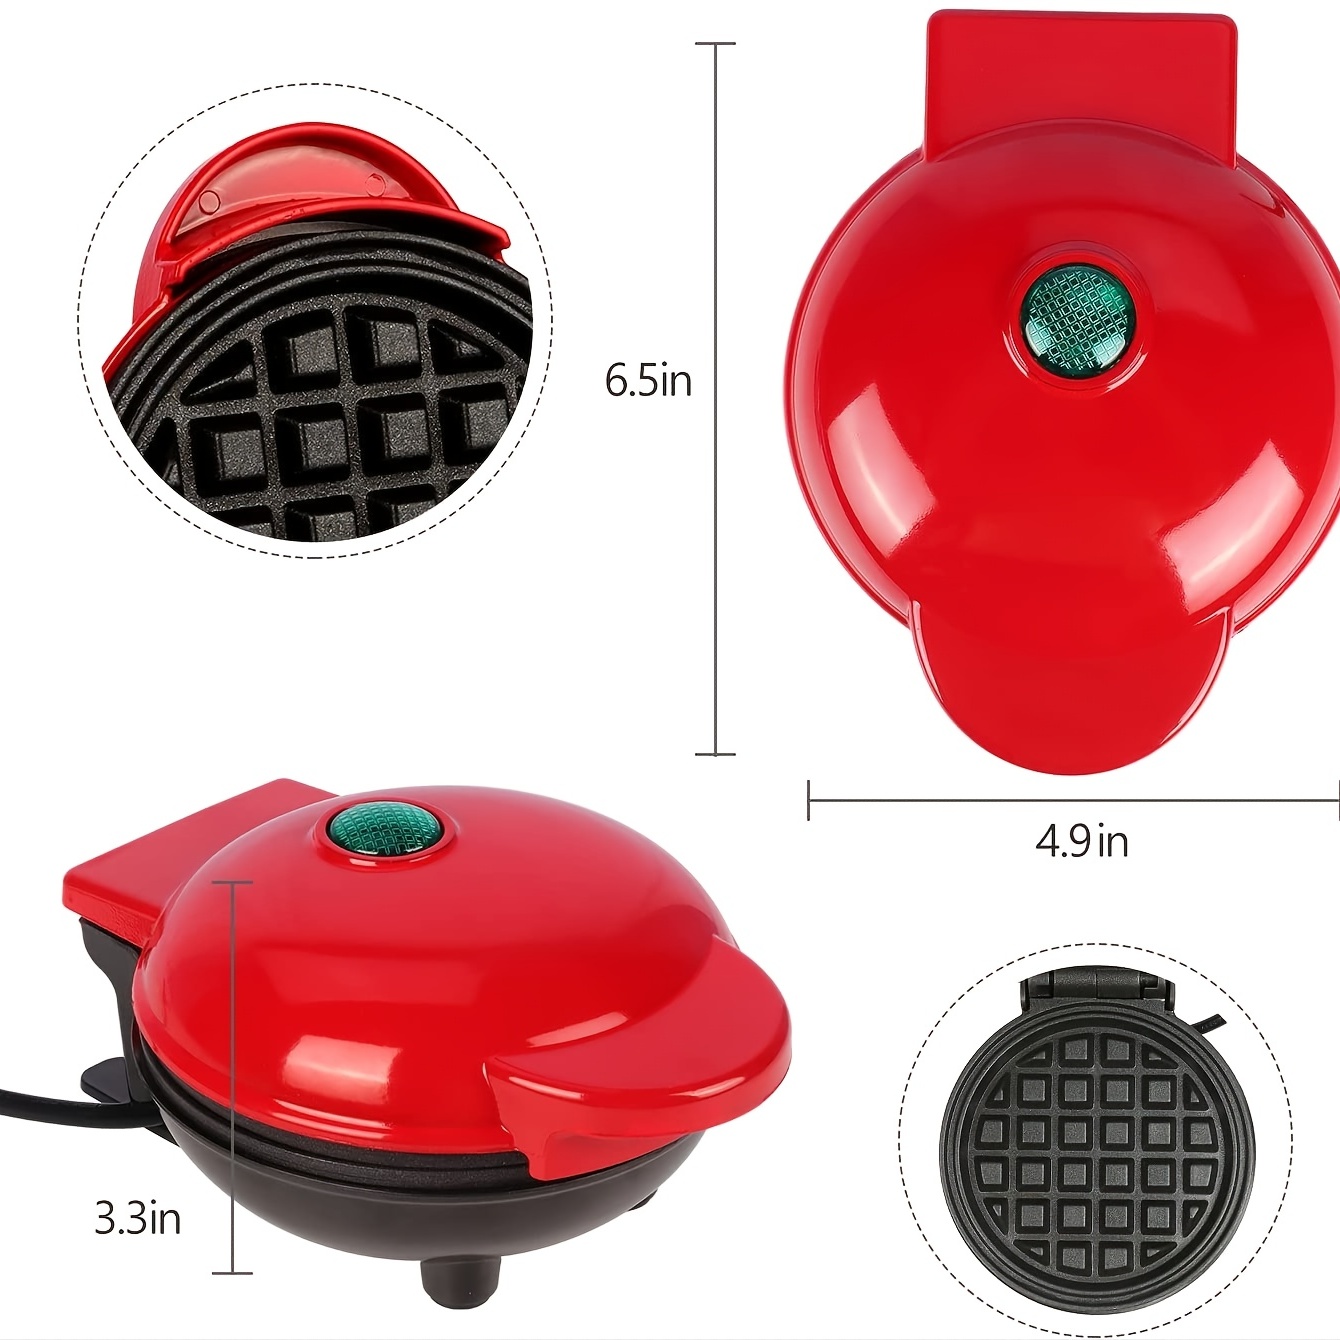 DASH 8” Express Electric Round Griddle for for Pancakes, Cookies